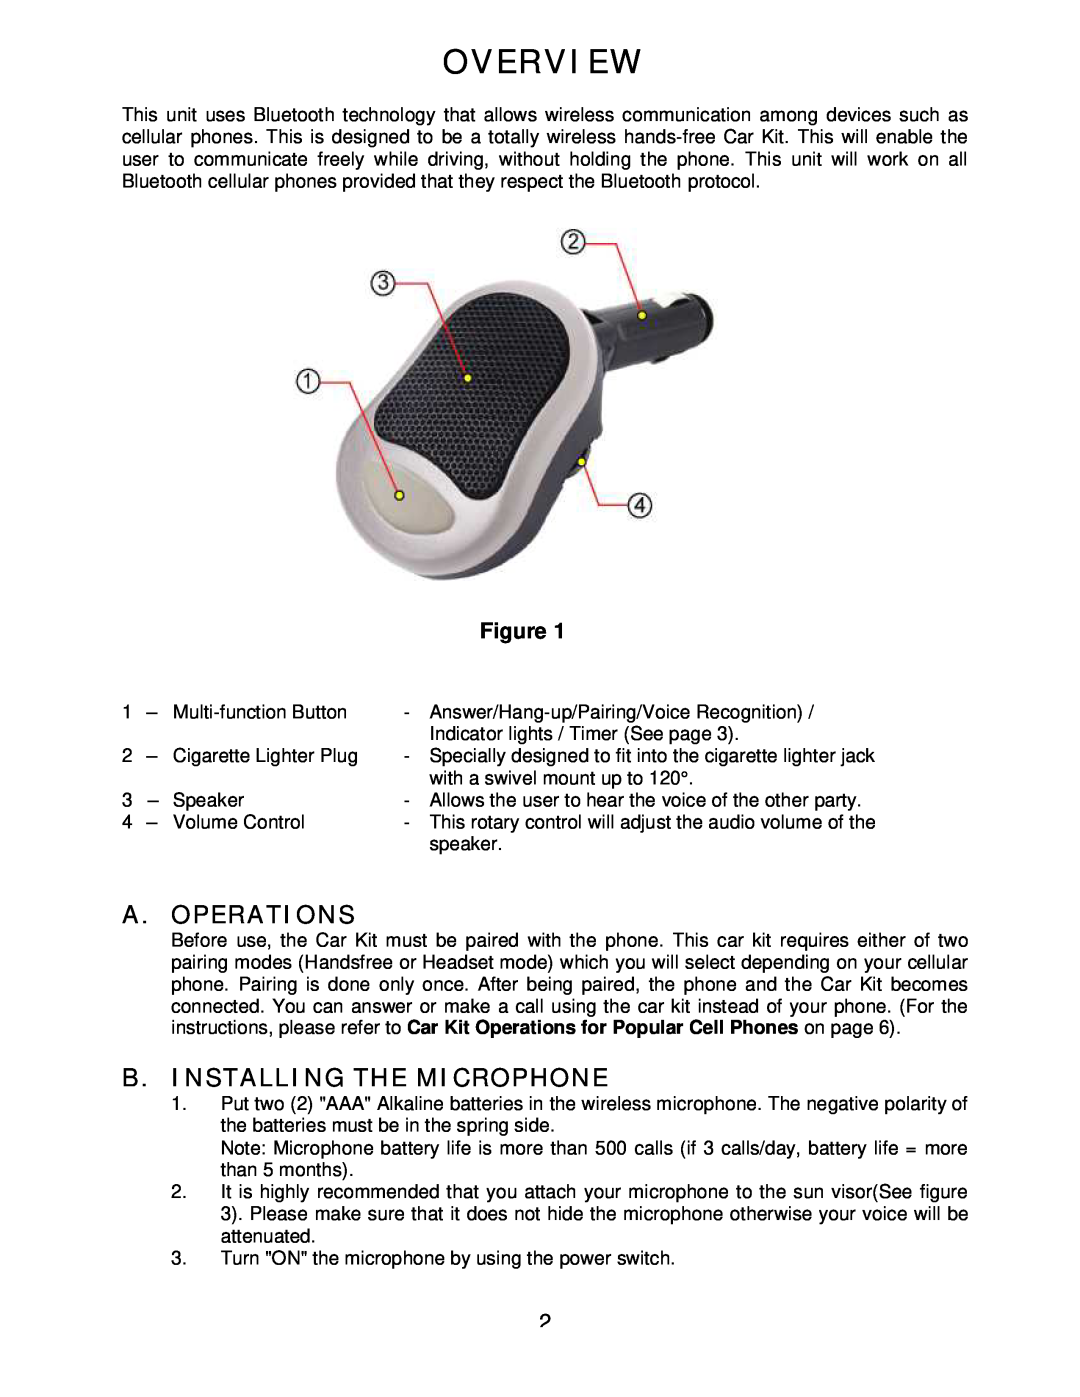 Sony headphone manual A. Operations, B.Installing The Microphone, Overview 